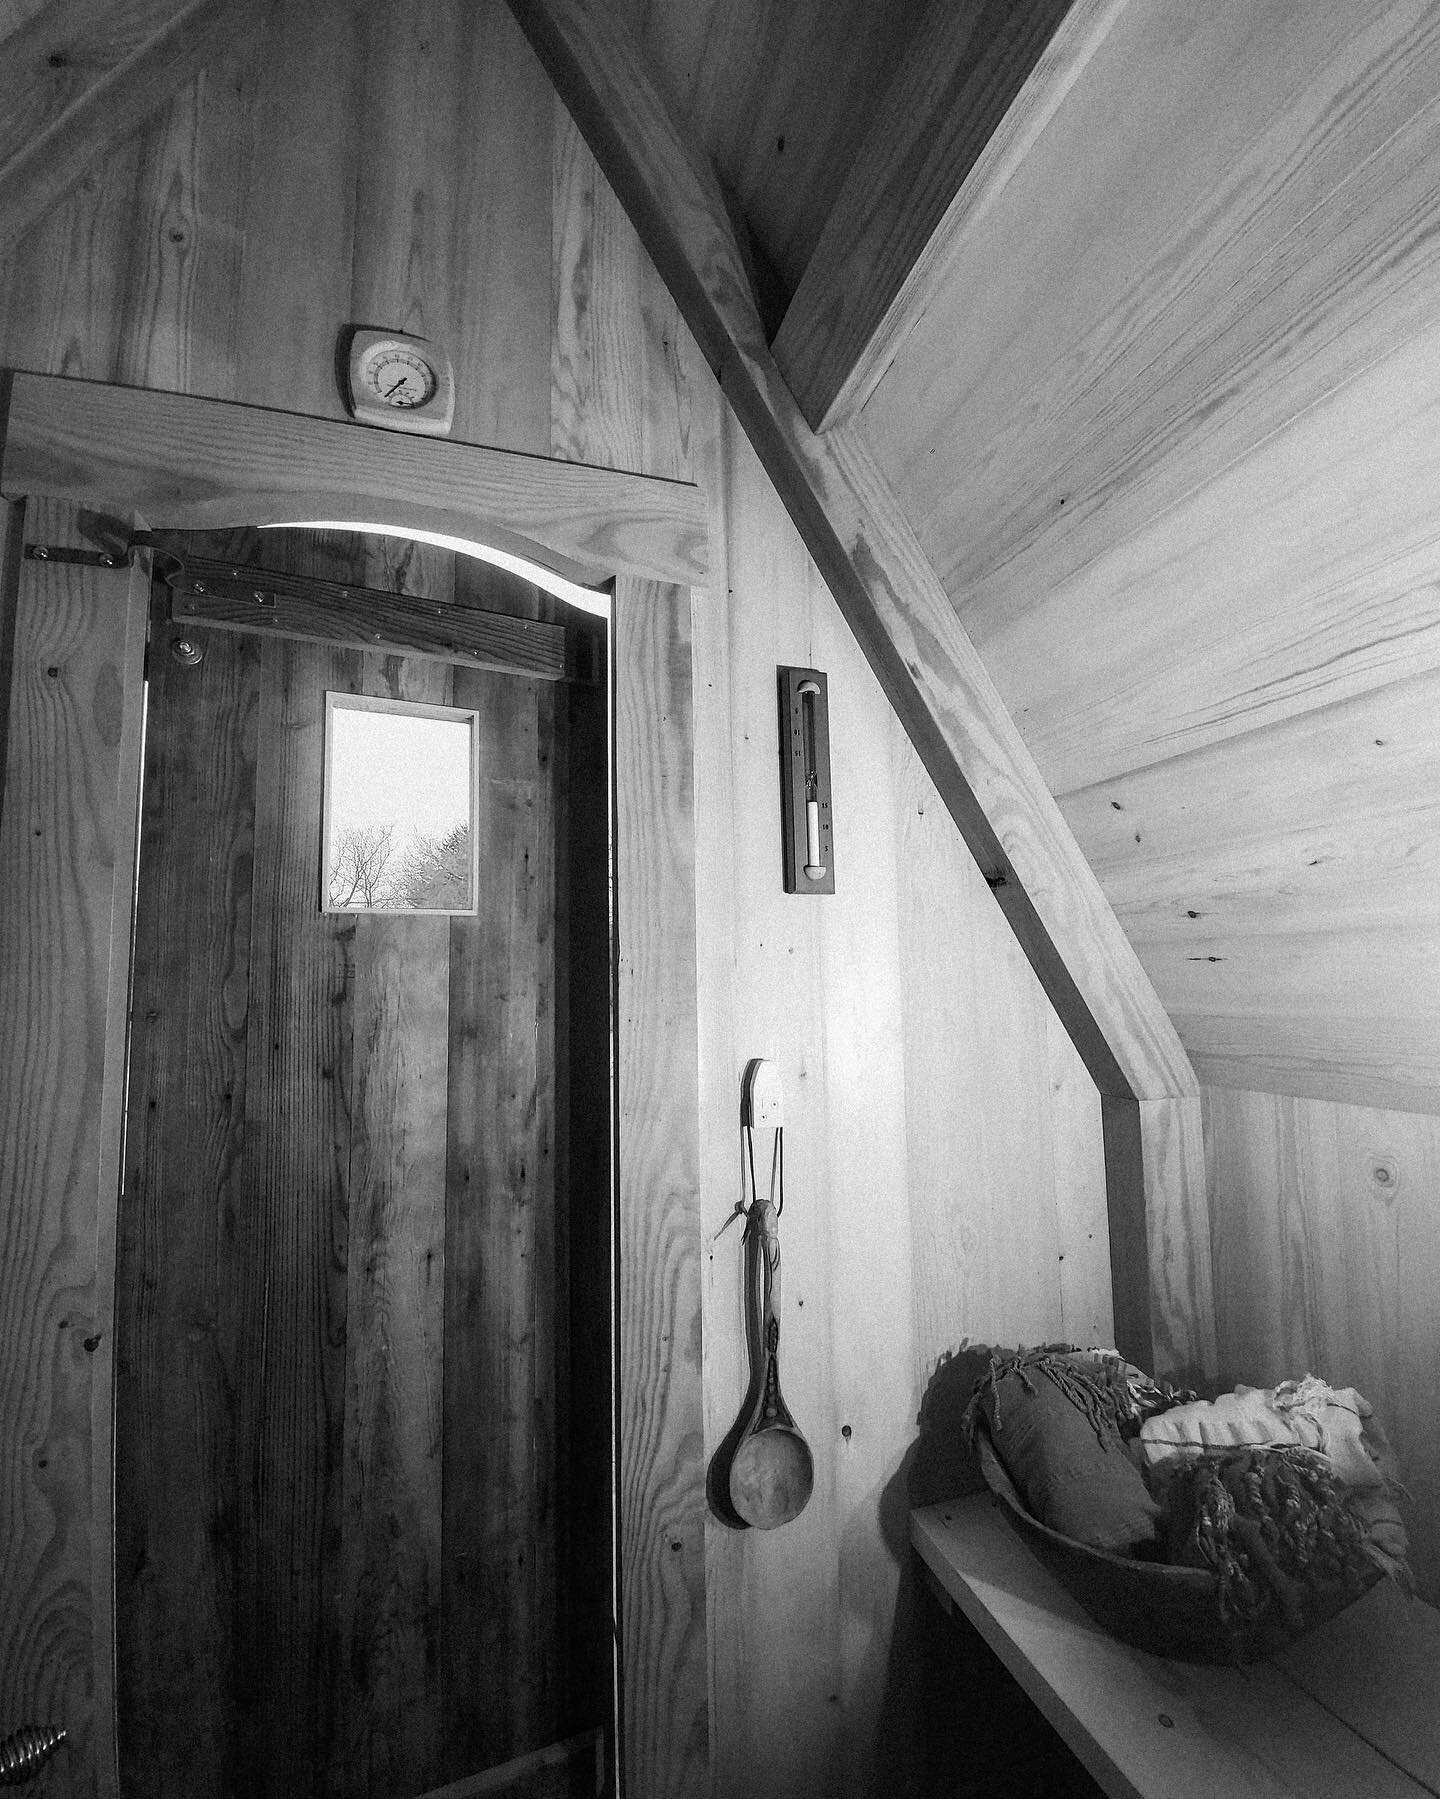 A look inside one of our modified A-frame saunas! All of our saunas come pre-assembled, ready to use for up to eight friendly folks (get cozy)